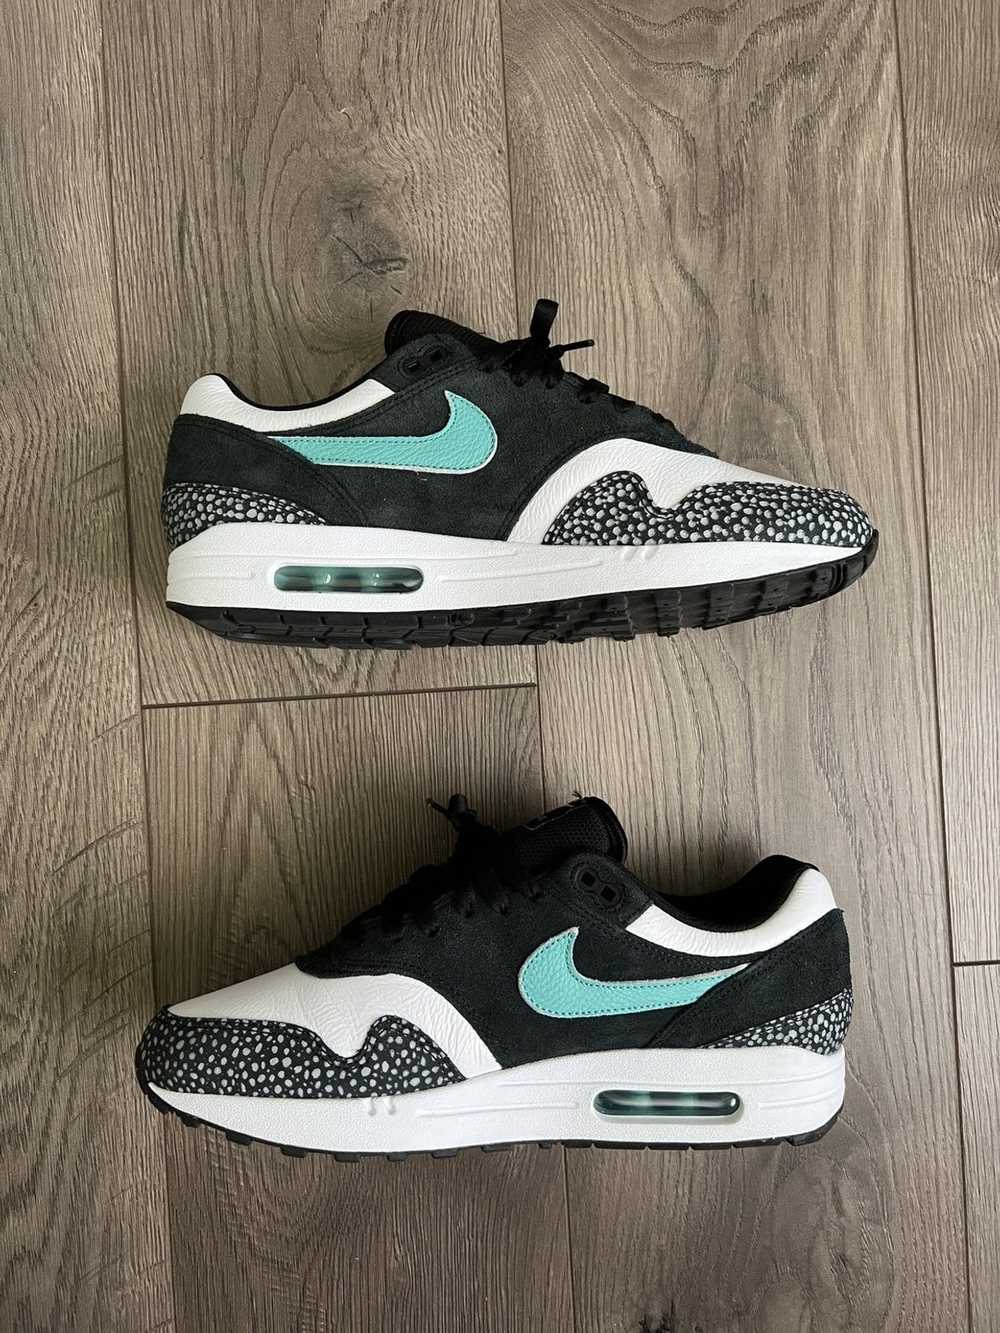 Nike Air Max 1 “Atmos” Nike By You - image 2